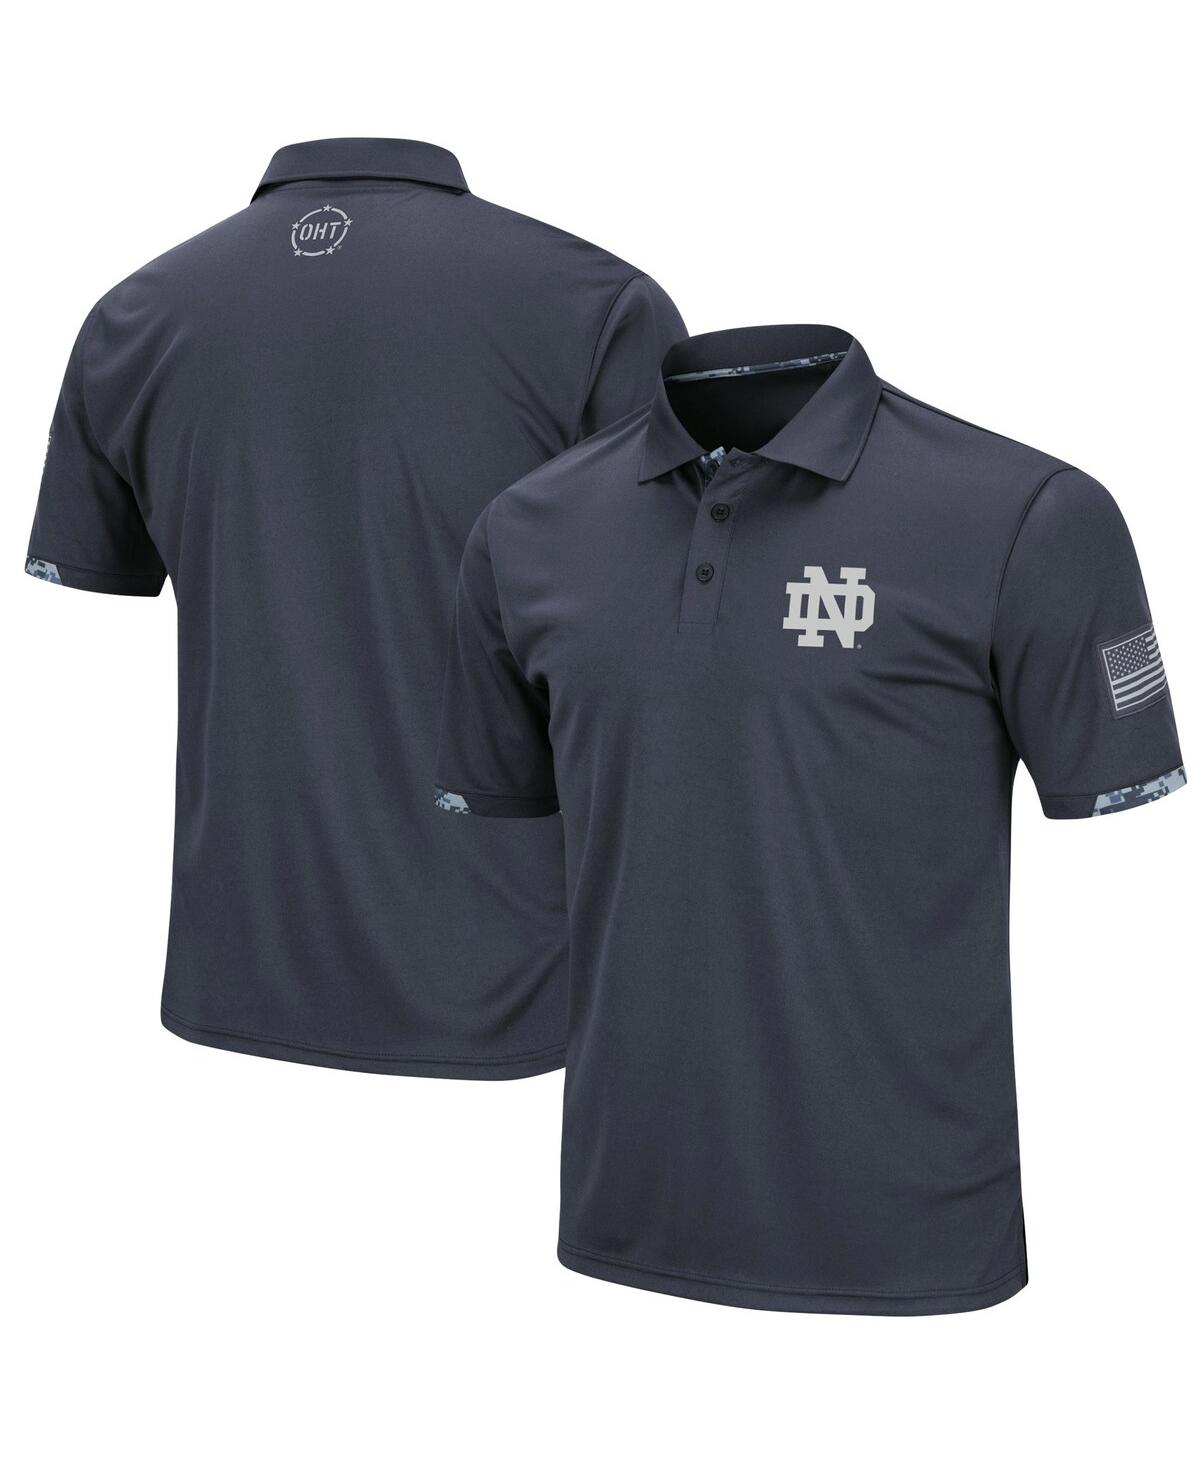 Men's Colosseum Charcoal Notre Dame Fighting Irish Oht Military-Inspired Appreciation Digital Camo Polo Shirt - Charcoal